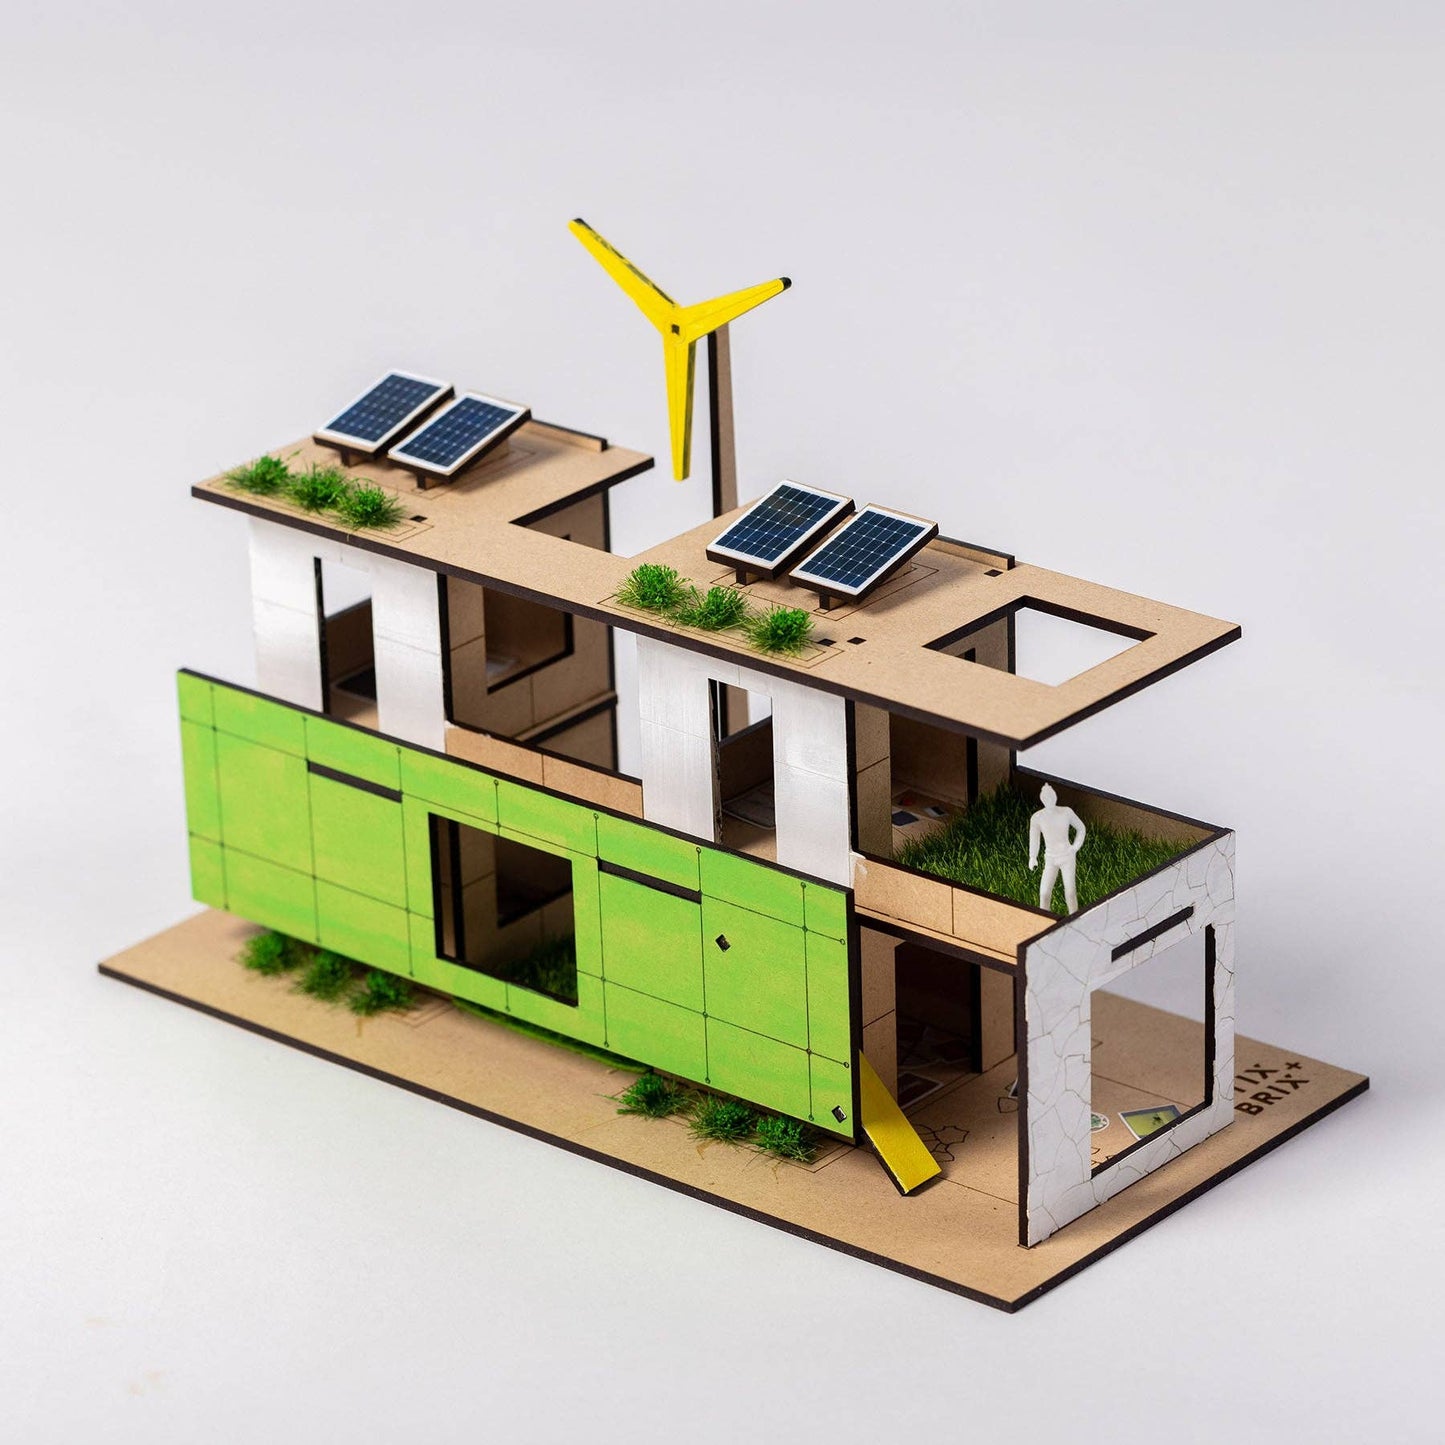 Eco-House Architectural Model Making Kit